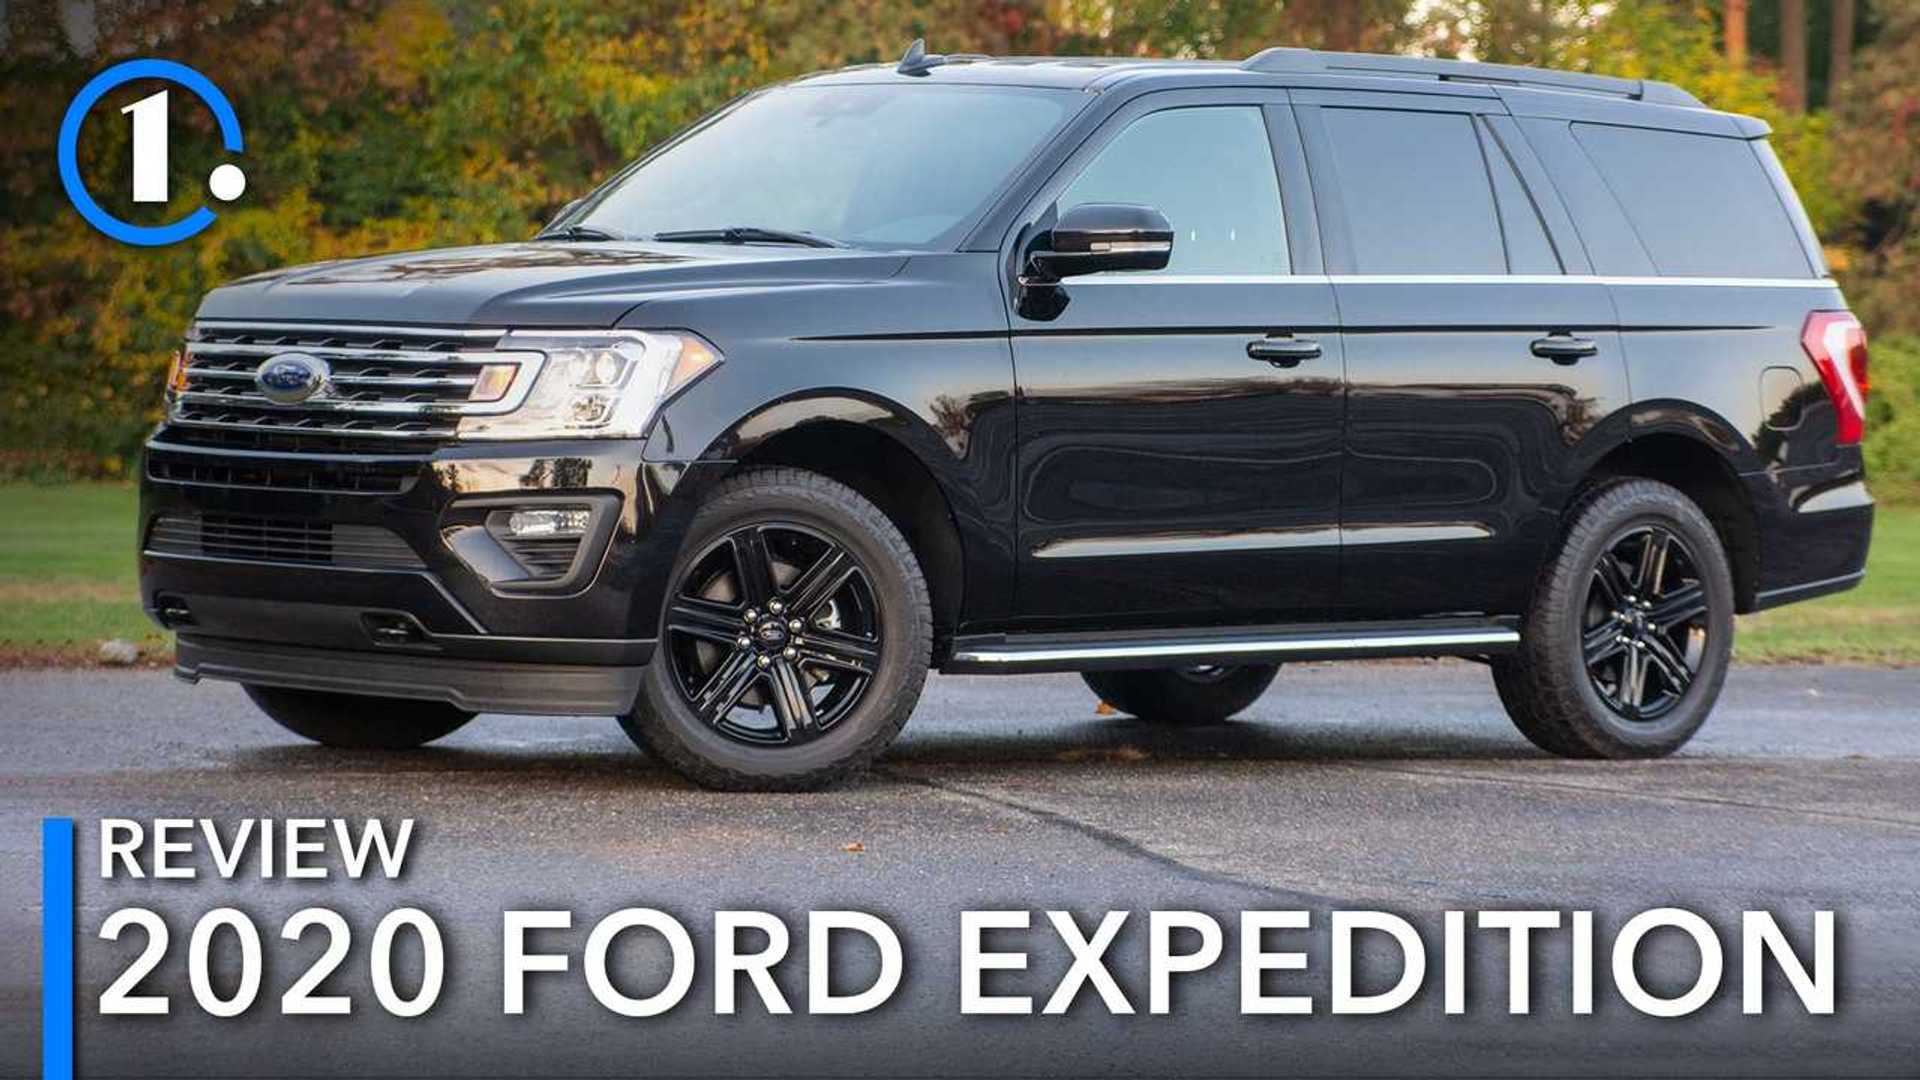 2020 Ford Expedition Review: Still Fighting